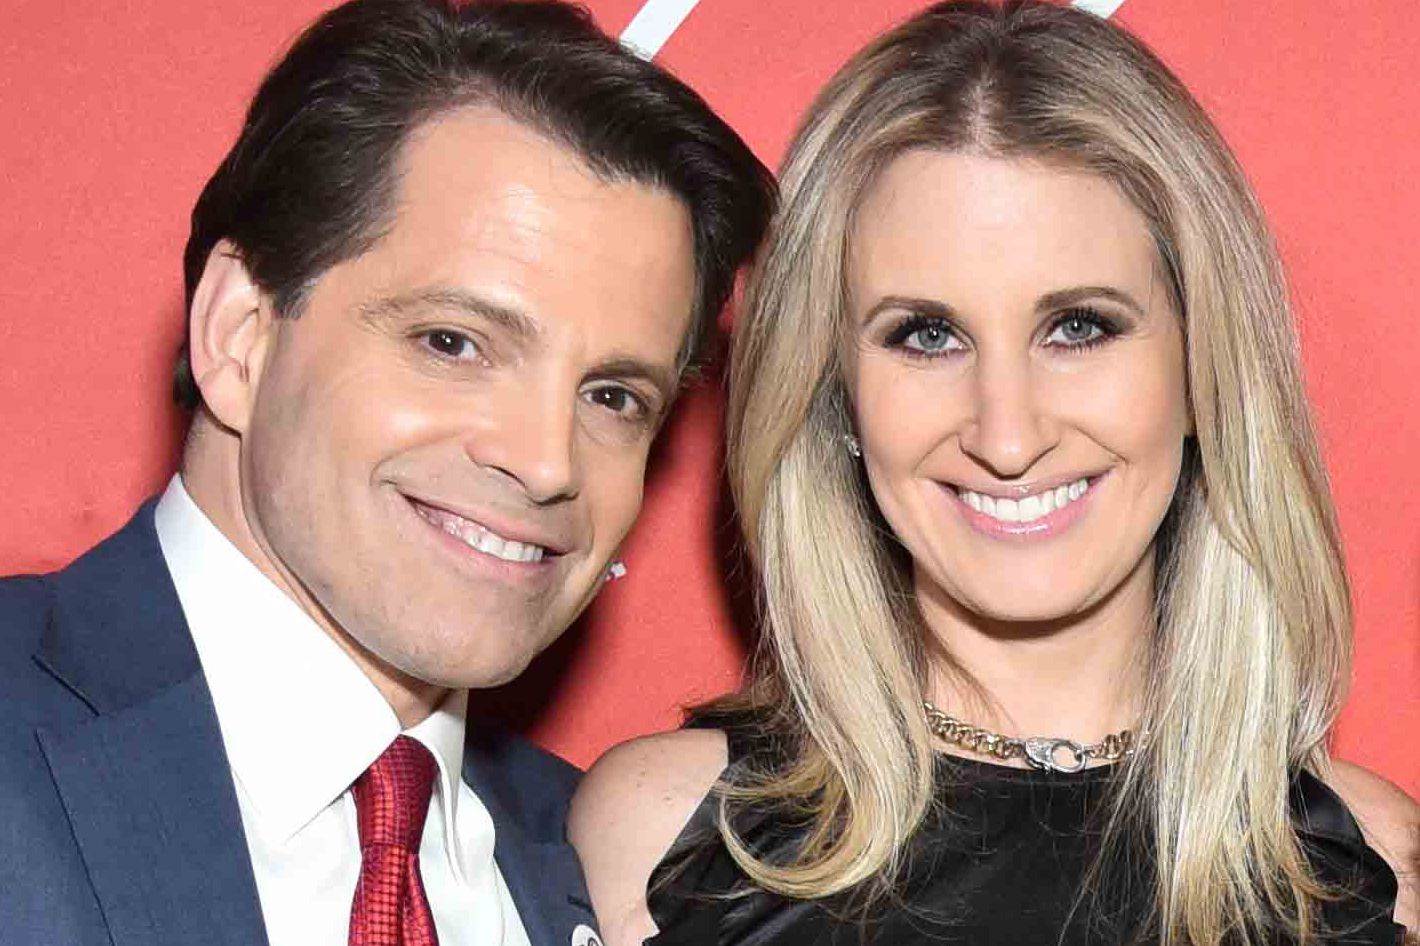 Anthony Scaramuccis Wife Has Reportedly Filed for Divorce pic photo